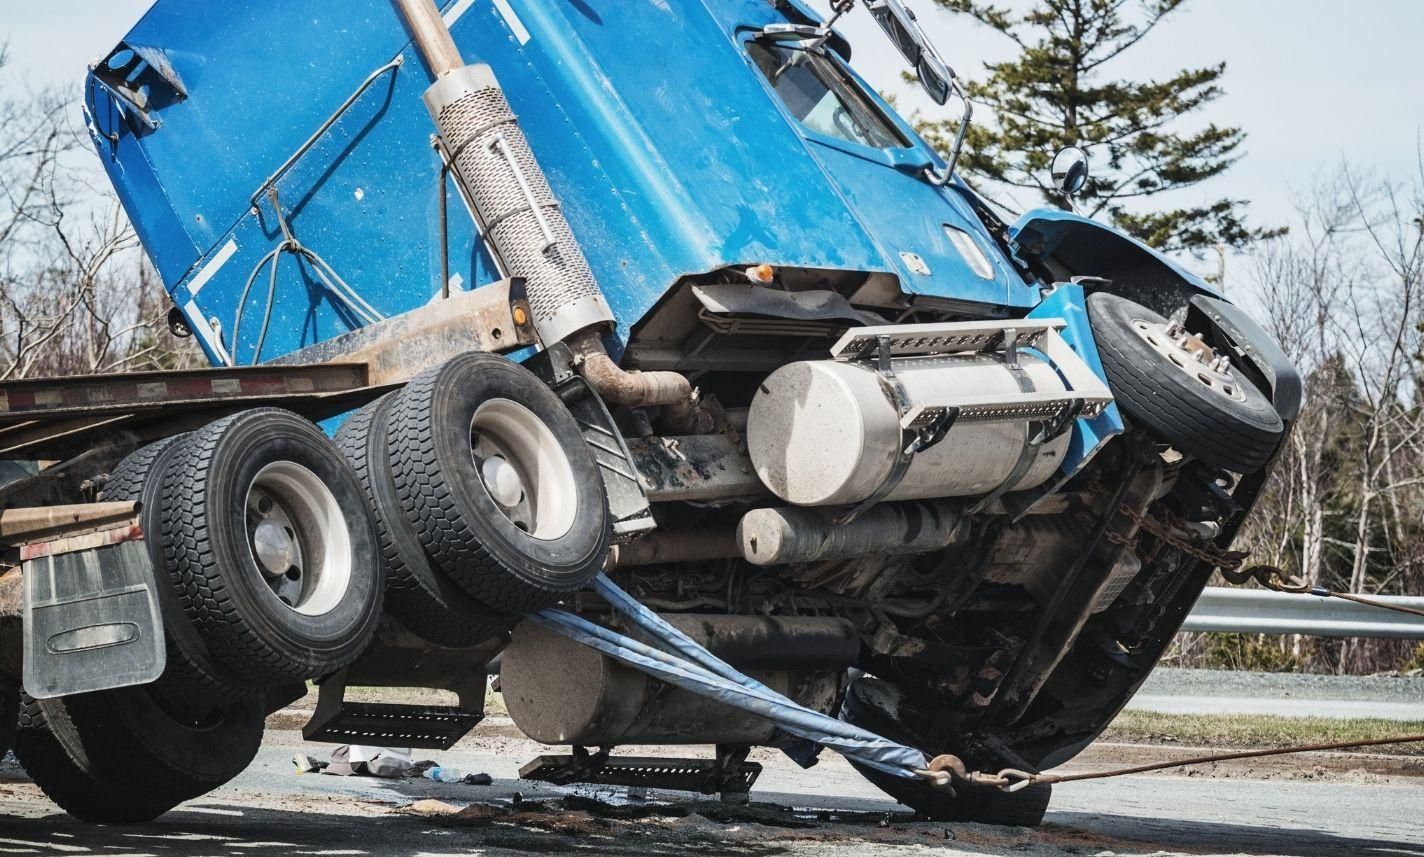 hiram-commercial-truck-accident-injury-lawyer